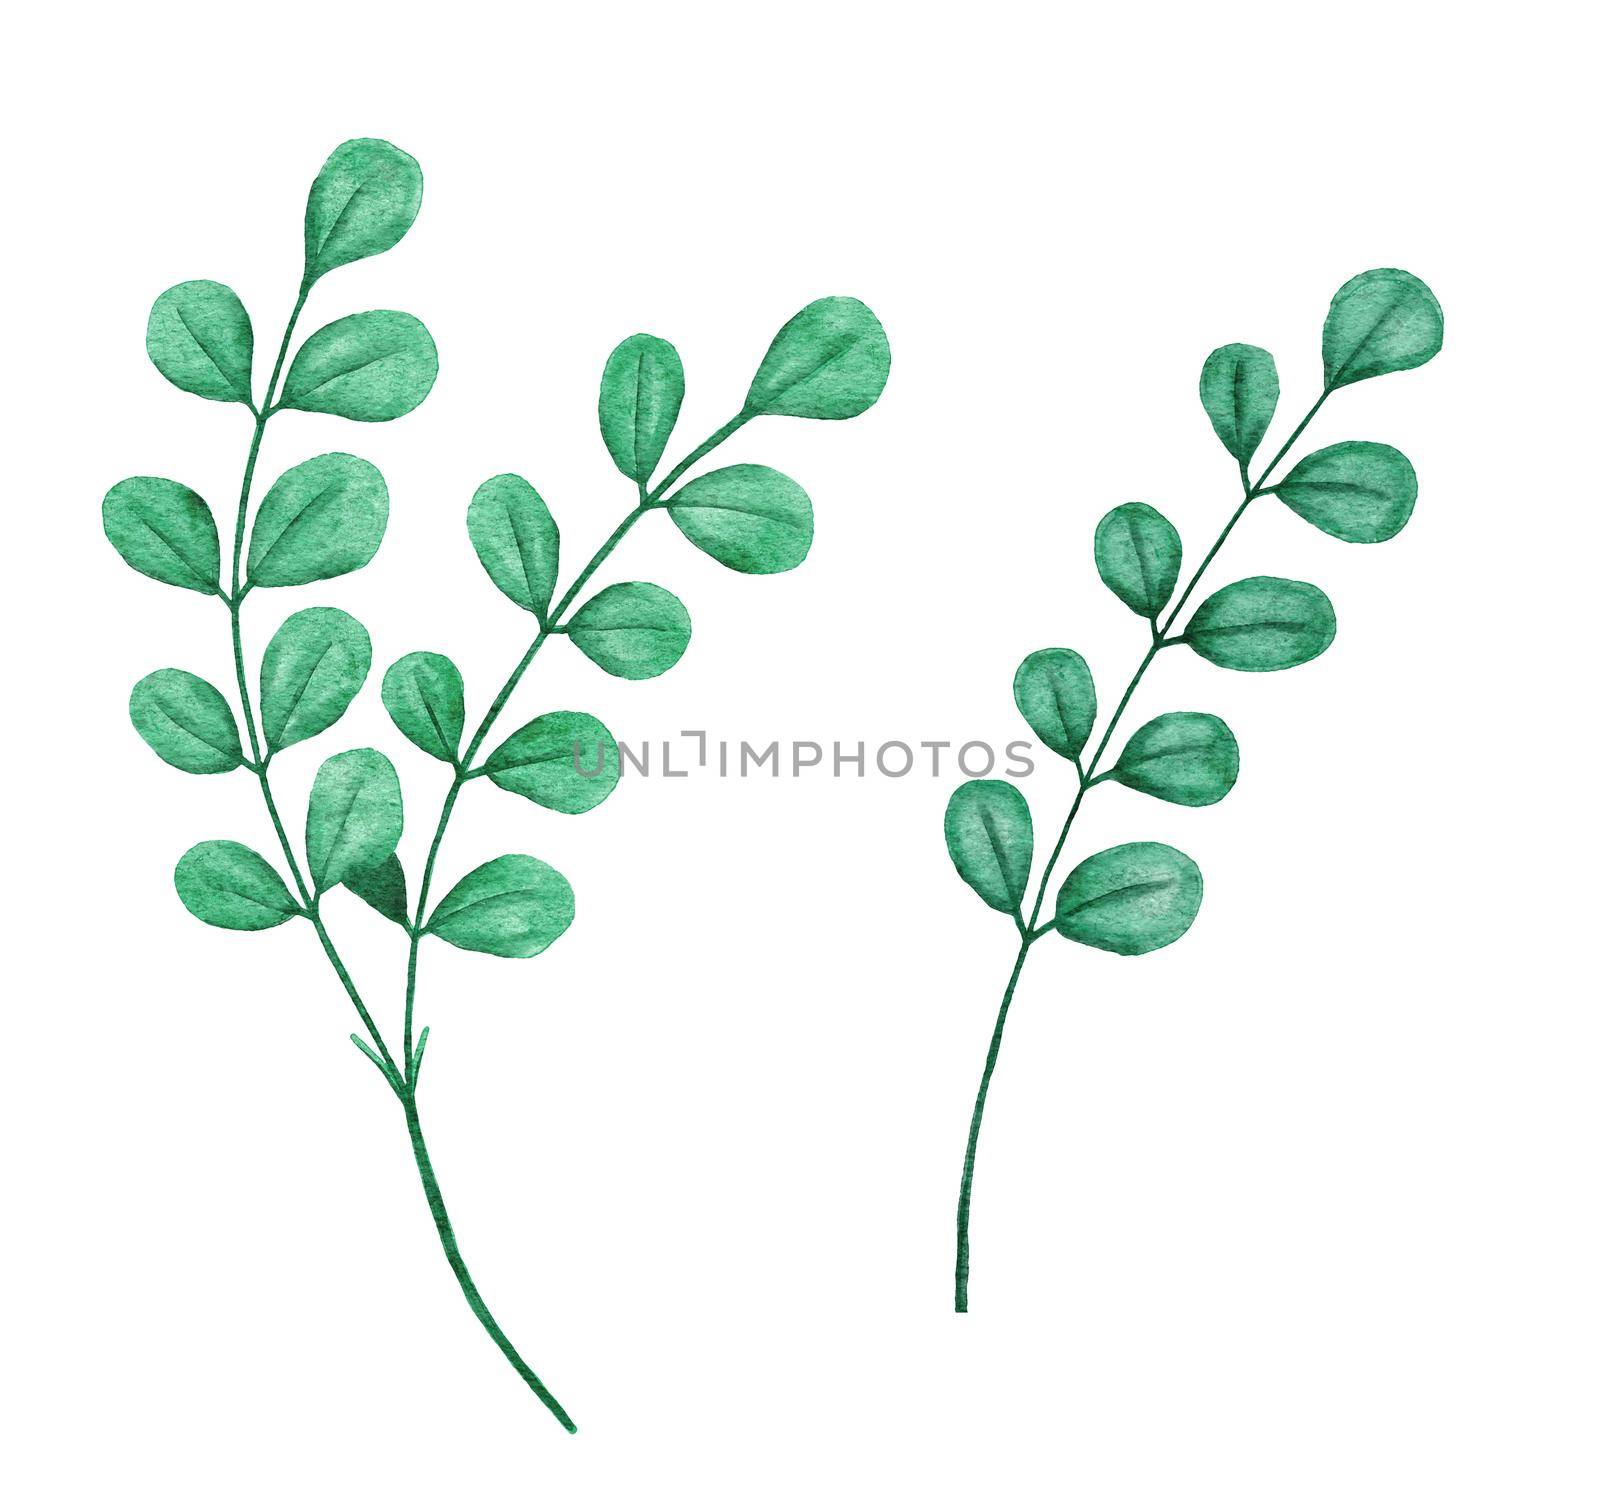 Watercolor hand drawn illsutration of green leaves, rose leaf greenery, spring summer design for natural botanic concept print. Elegant plant branches with vibrant colors